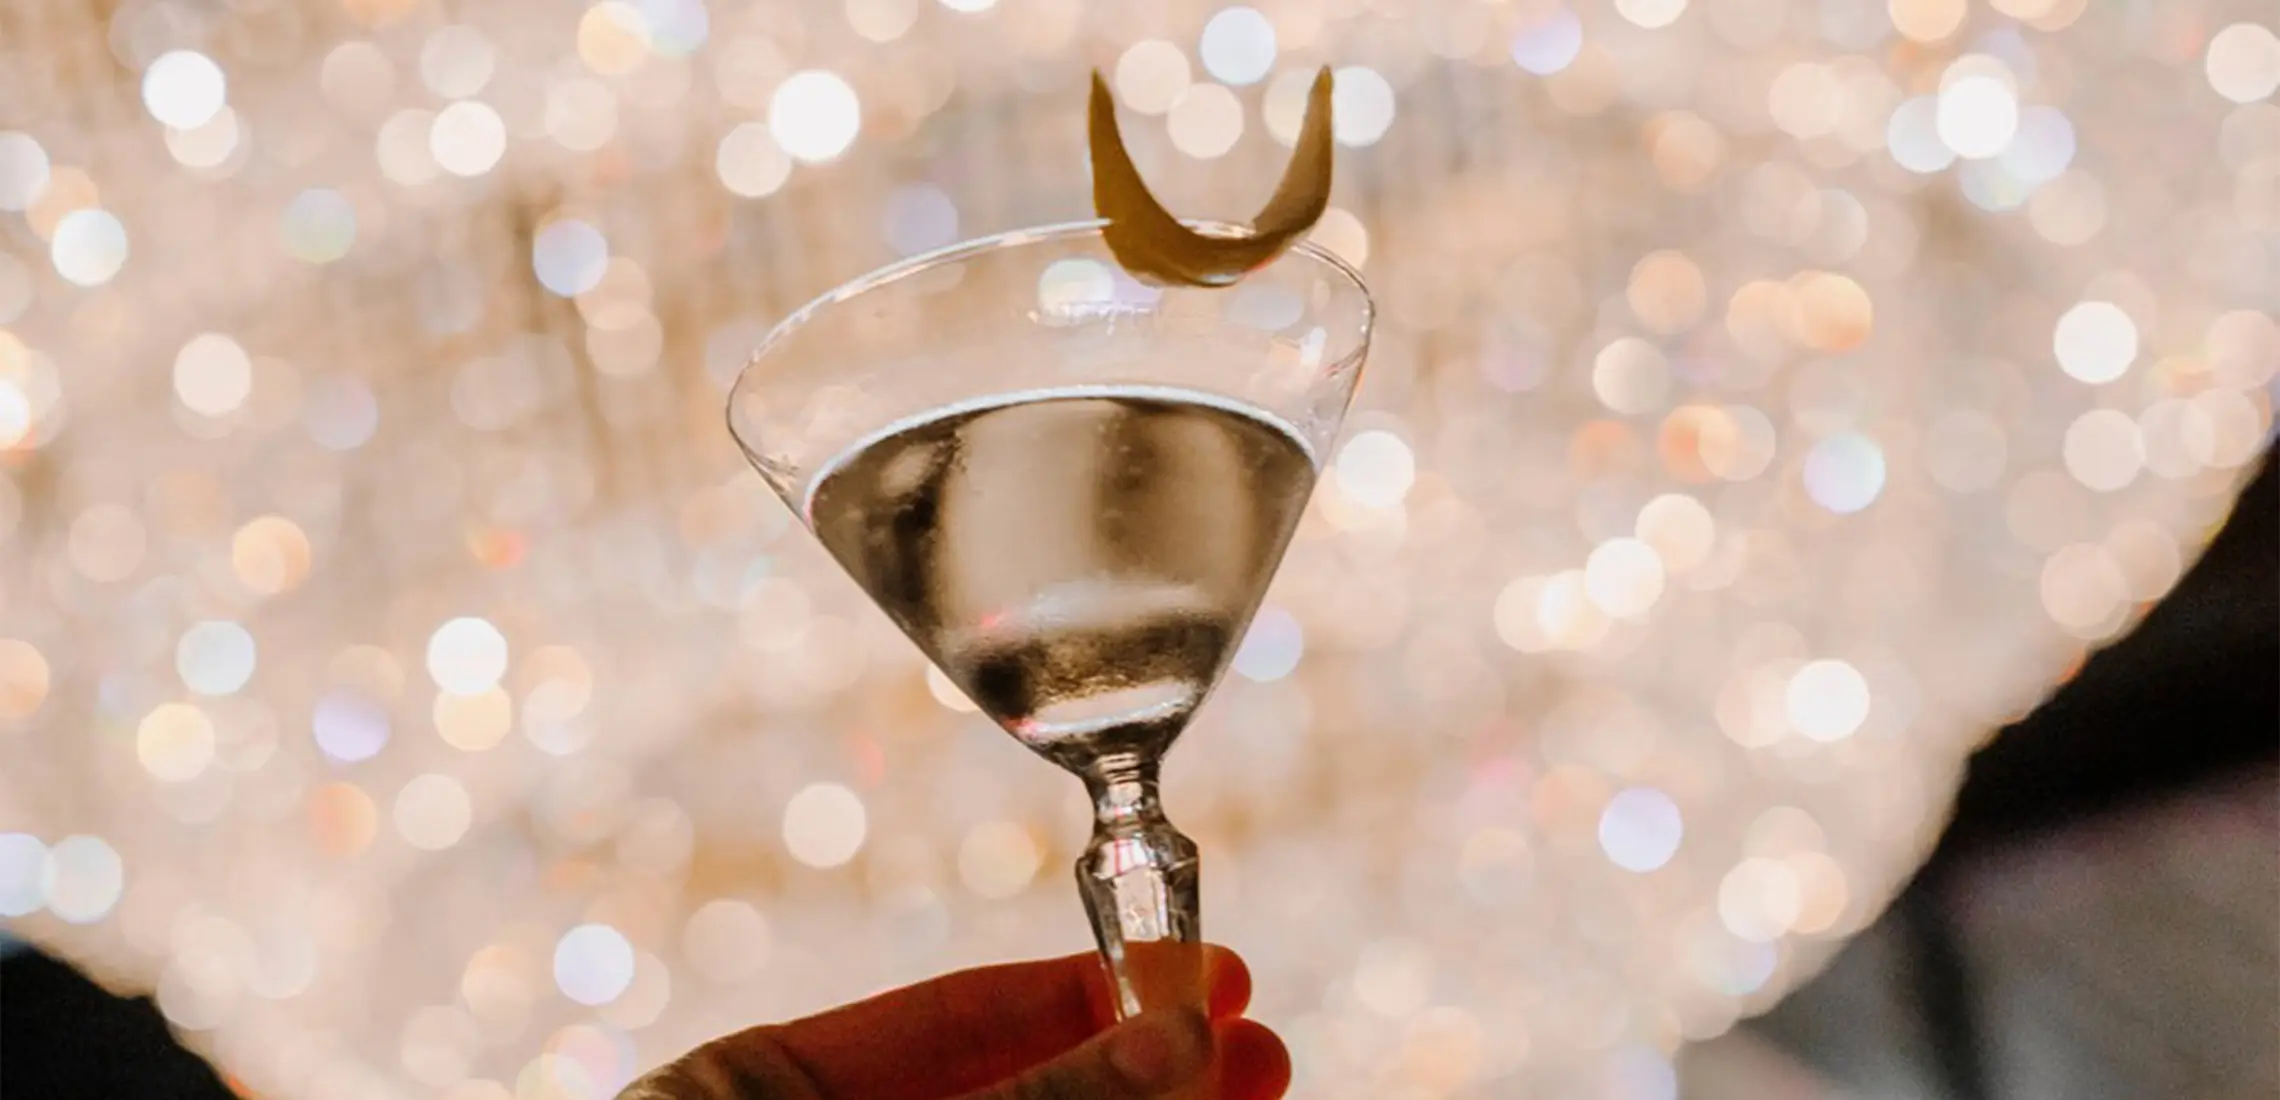 header - a picture of a martini glass